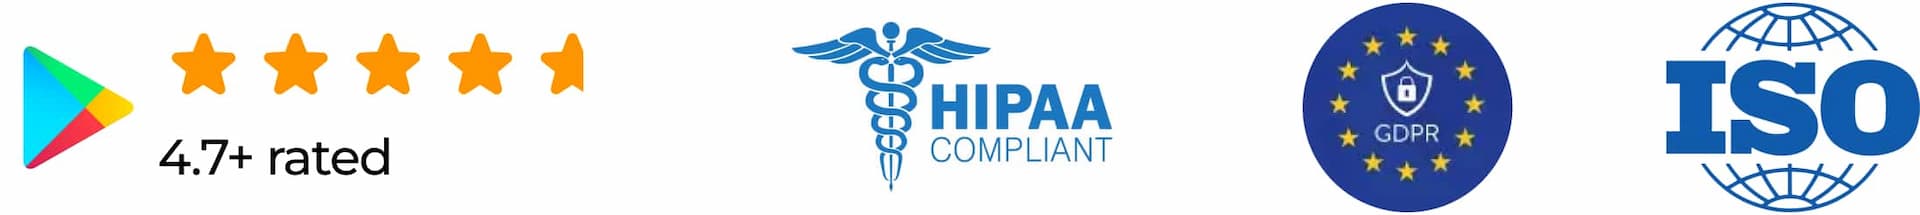 4.7 star rated | HIPAA Compliant | GDPR Compliant | ISO Certified